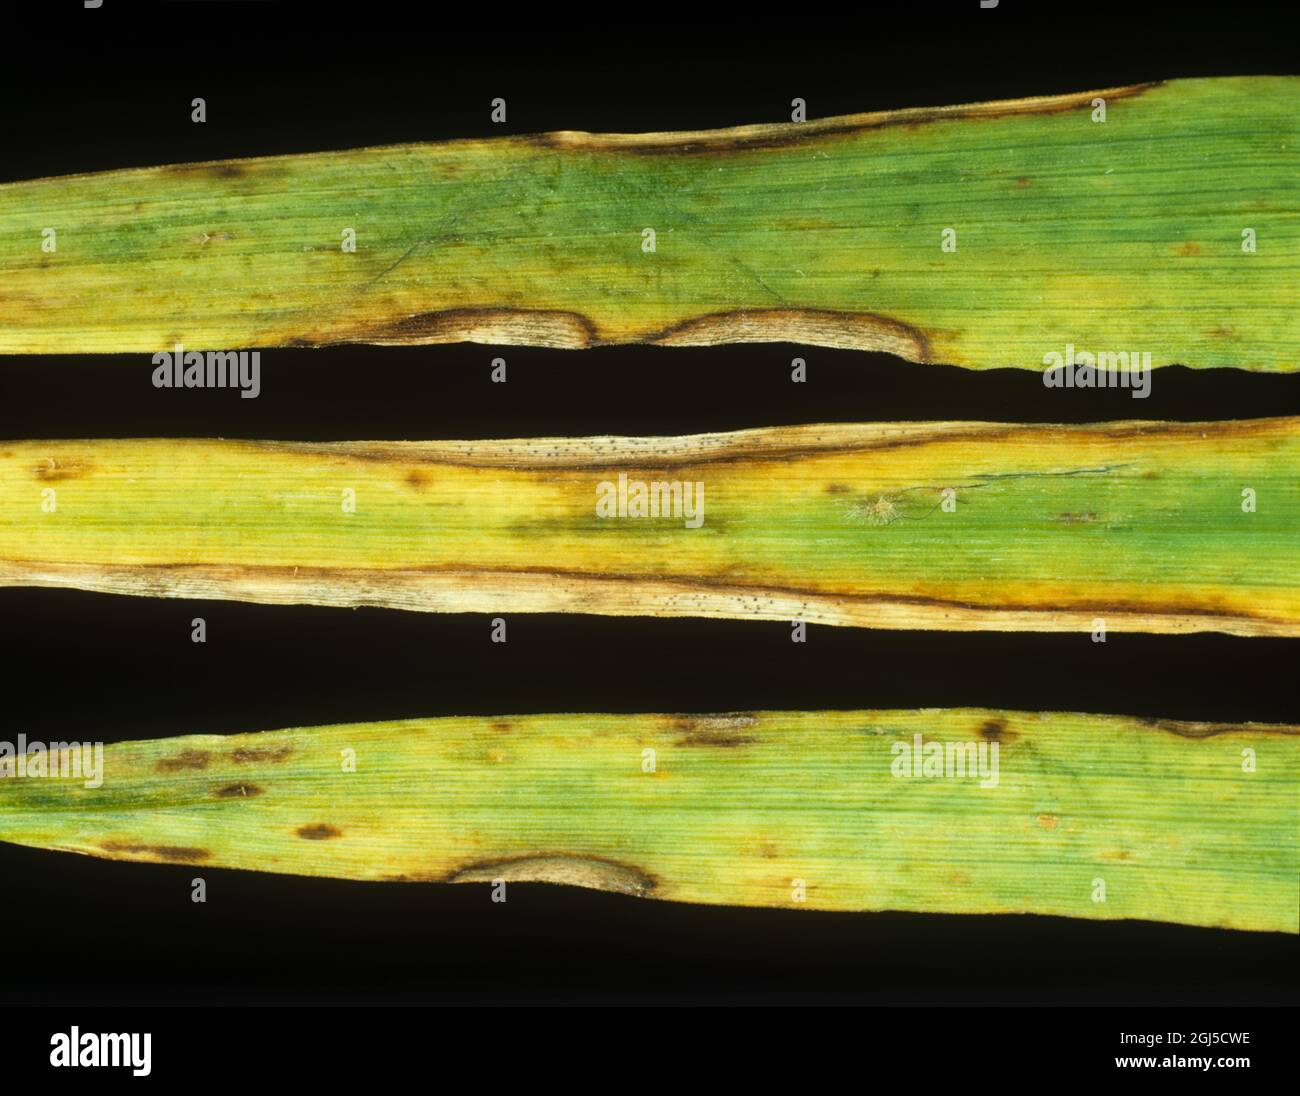 Ascochyta leaf spot or leaf blight (Ascochyta hordei) f ungal disease lesions on the periphery of barley leaves Stock Photo